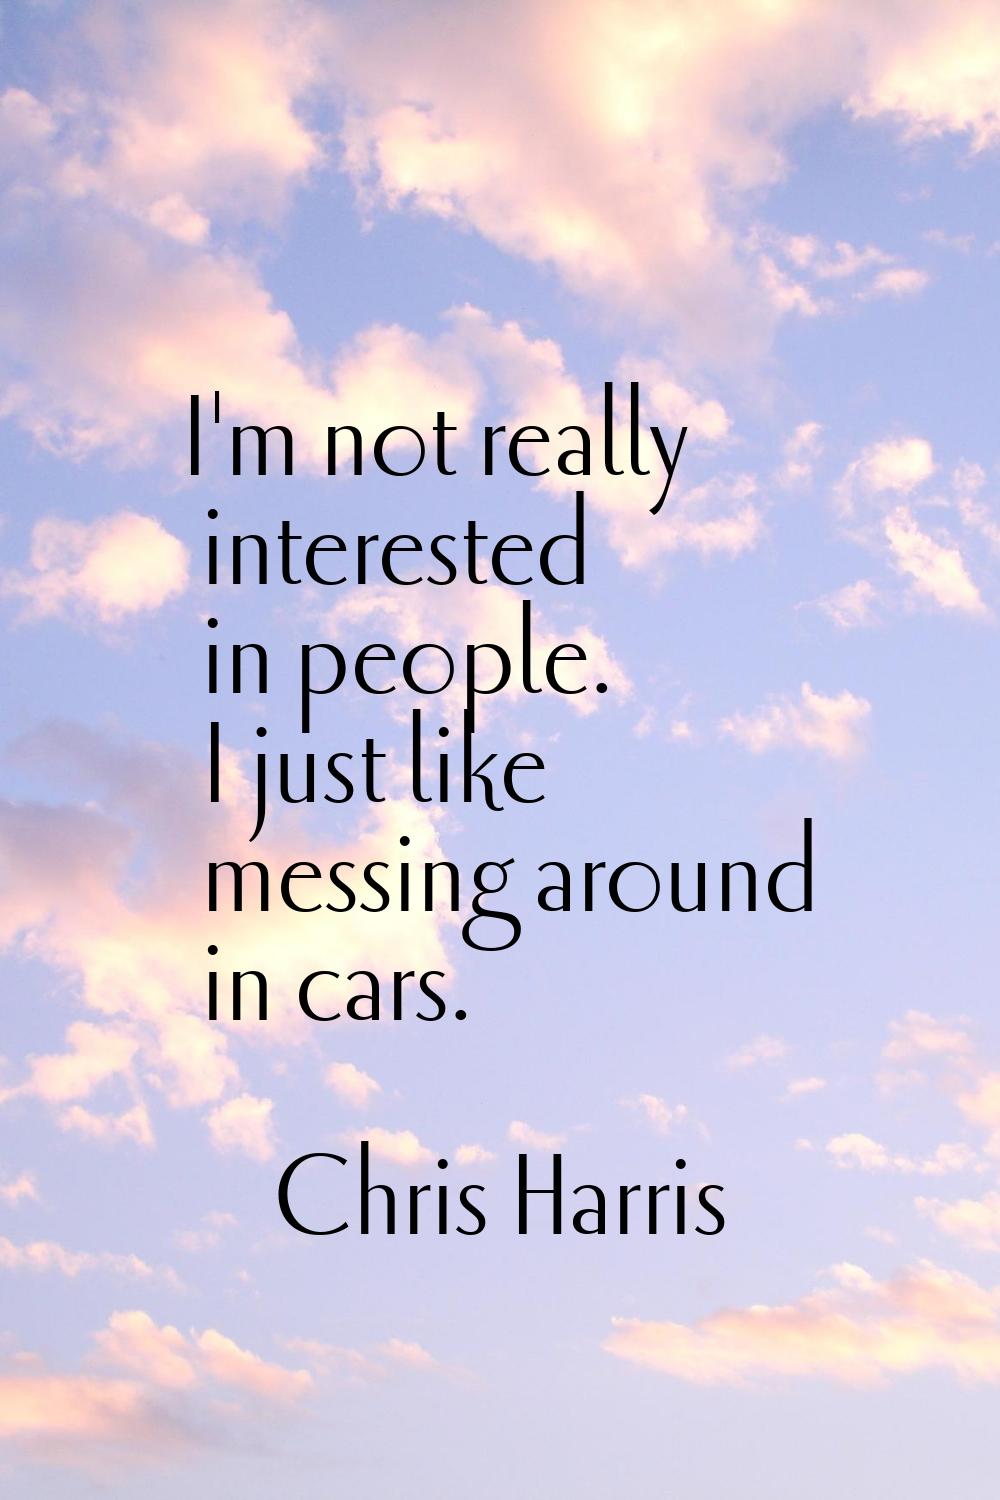 I'm not really interested in people. I just like messing around in cars.